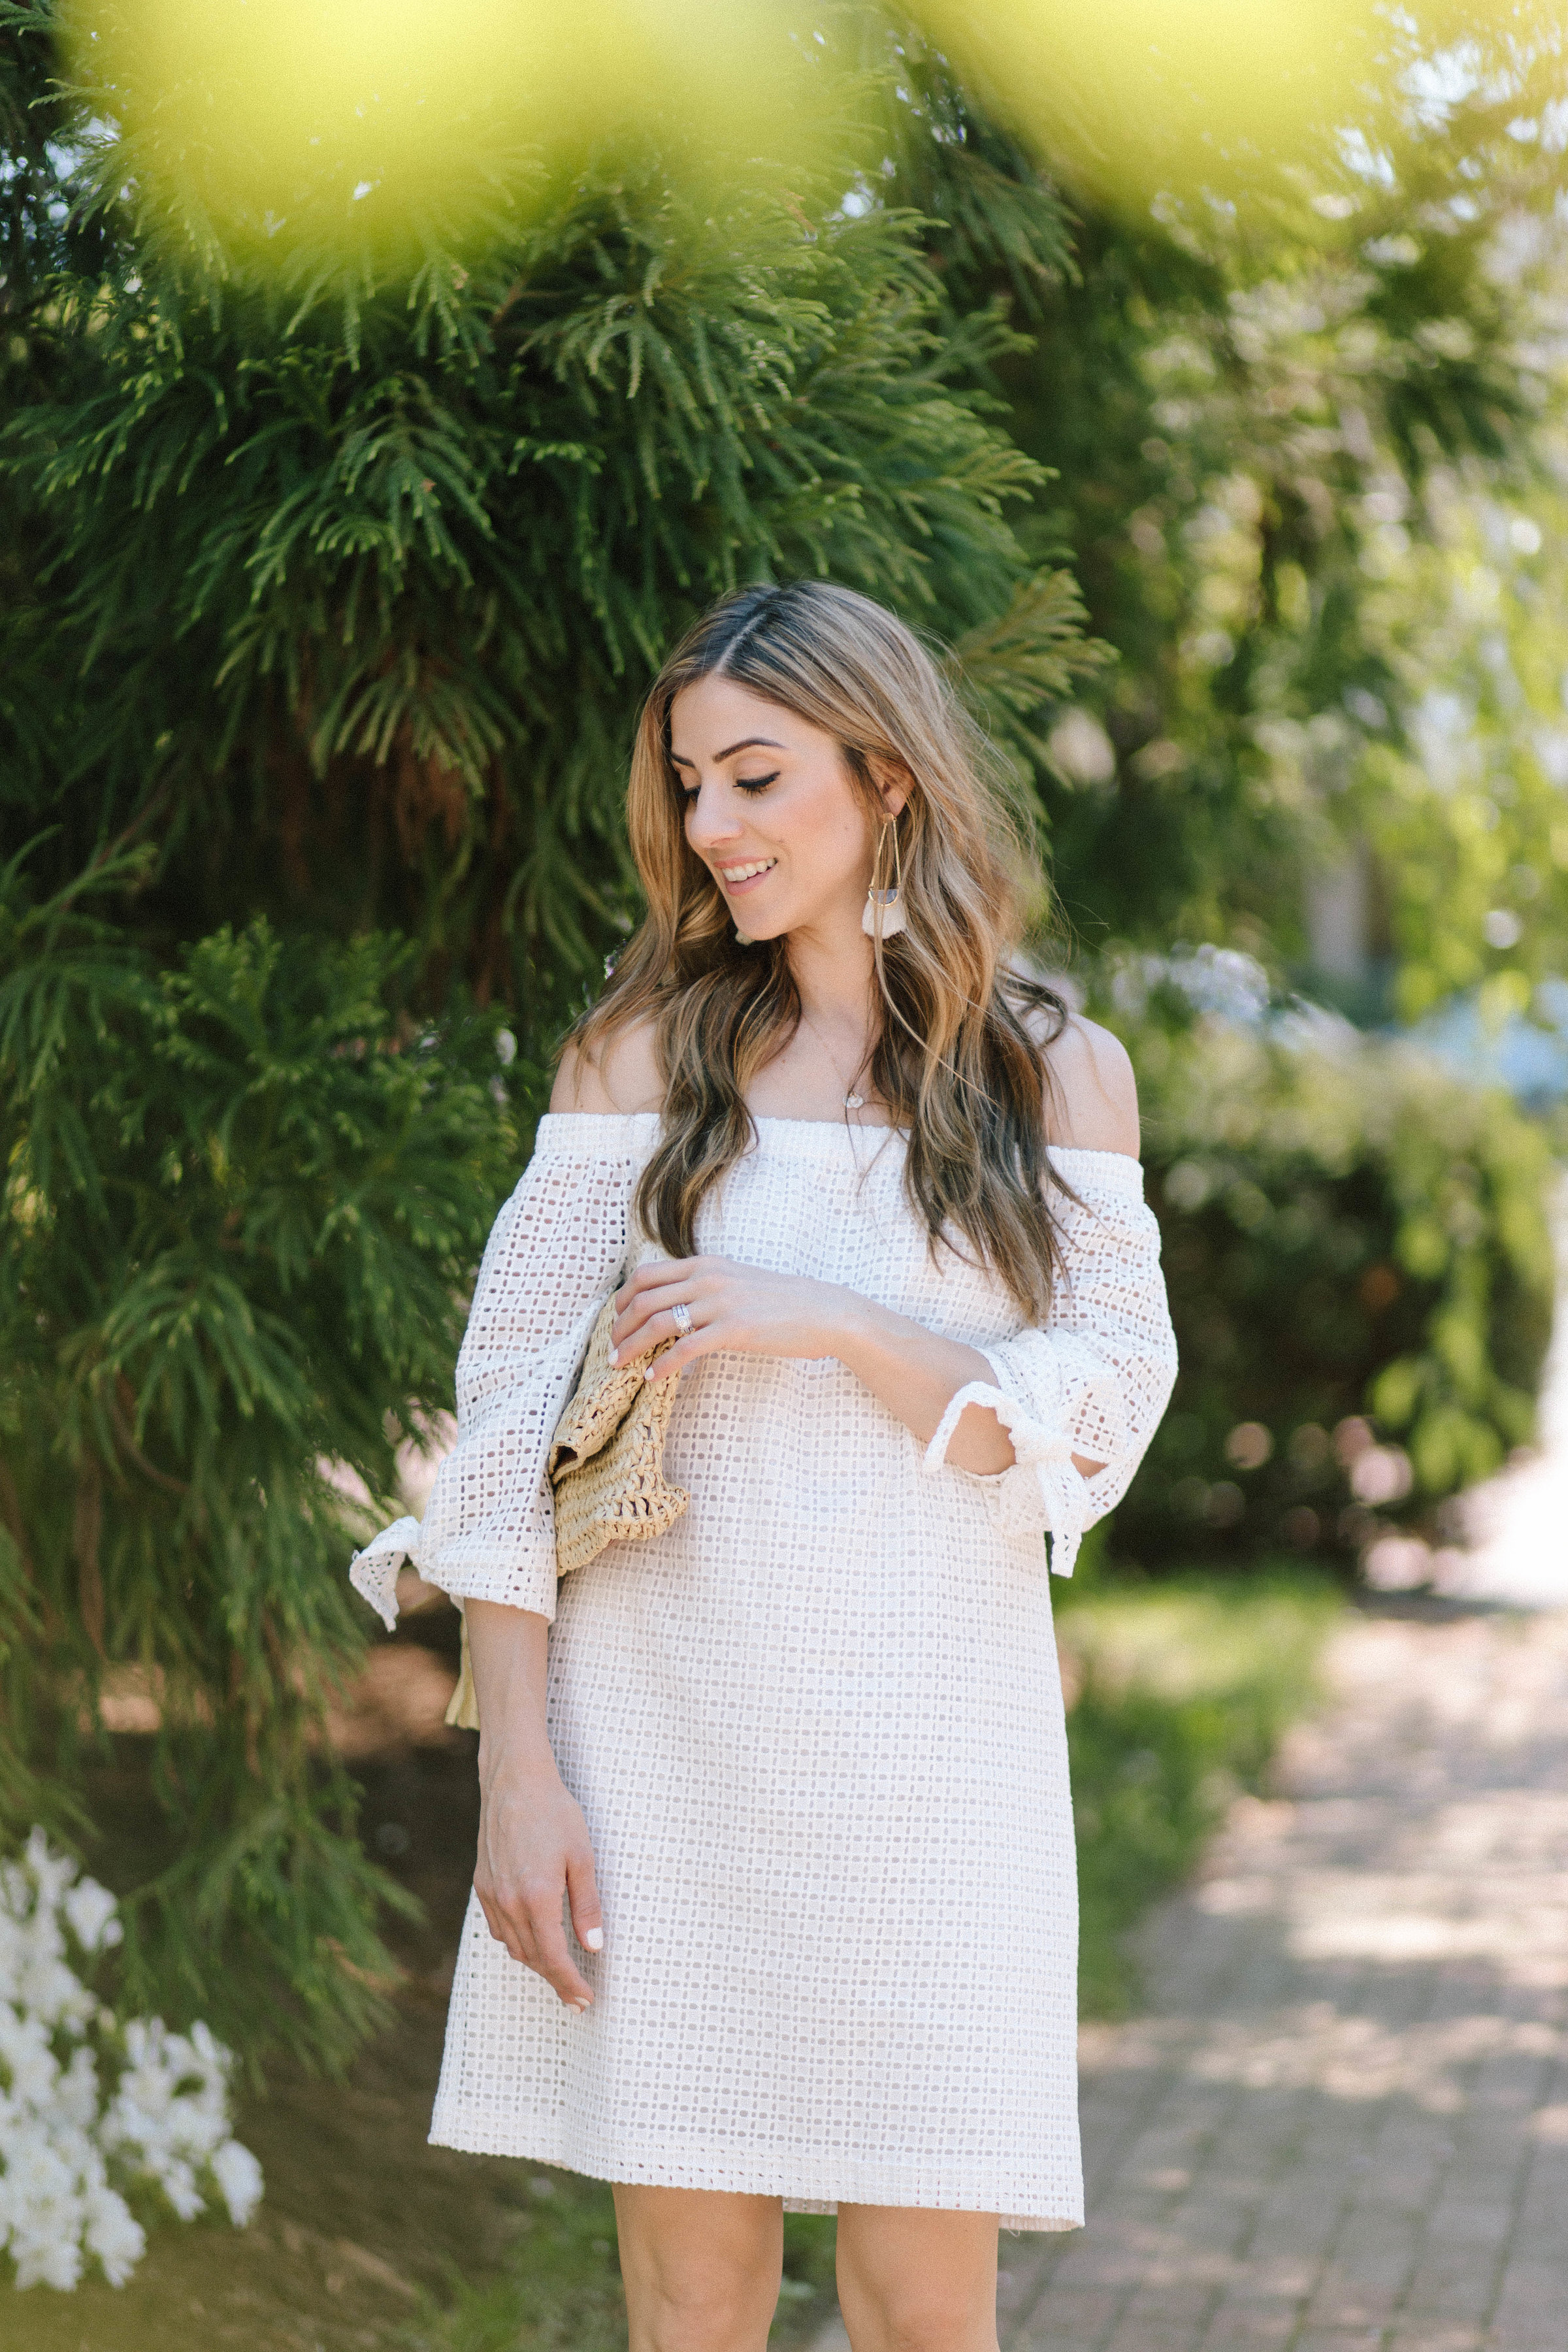 If you're looking to make the most of your closet, you need to check out these summer dresses styled two ways! They're versatile enough to style for day or night.